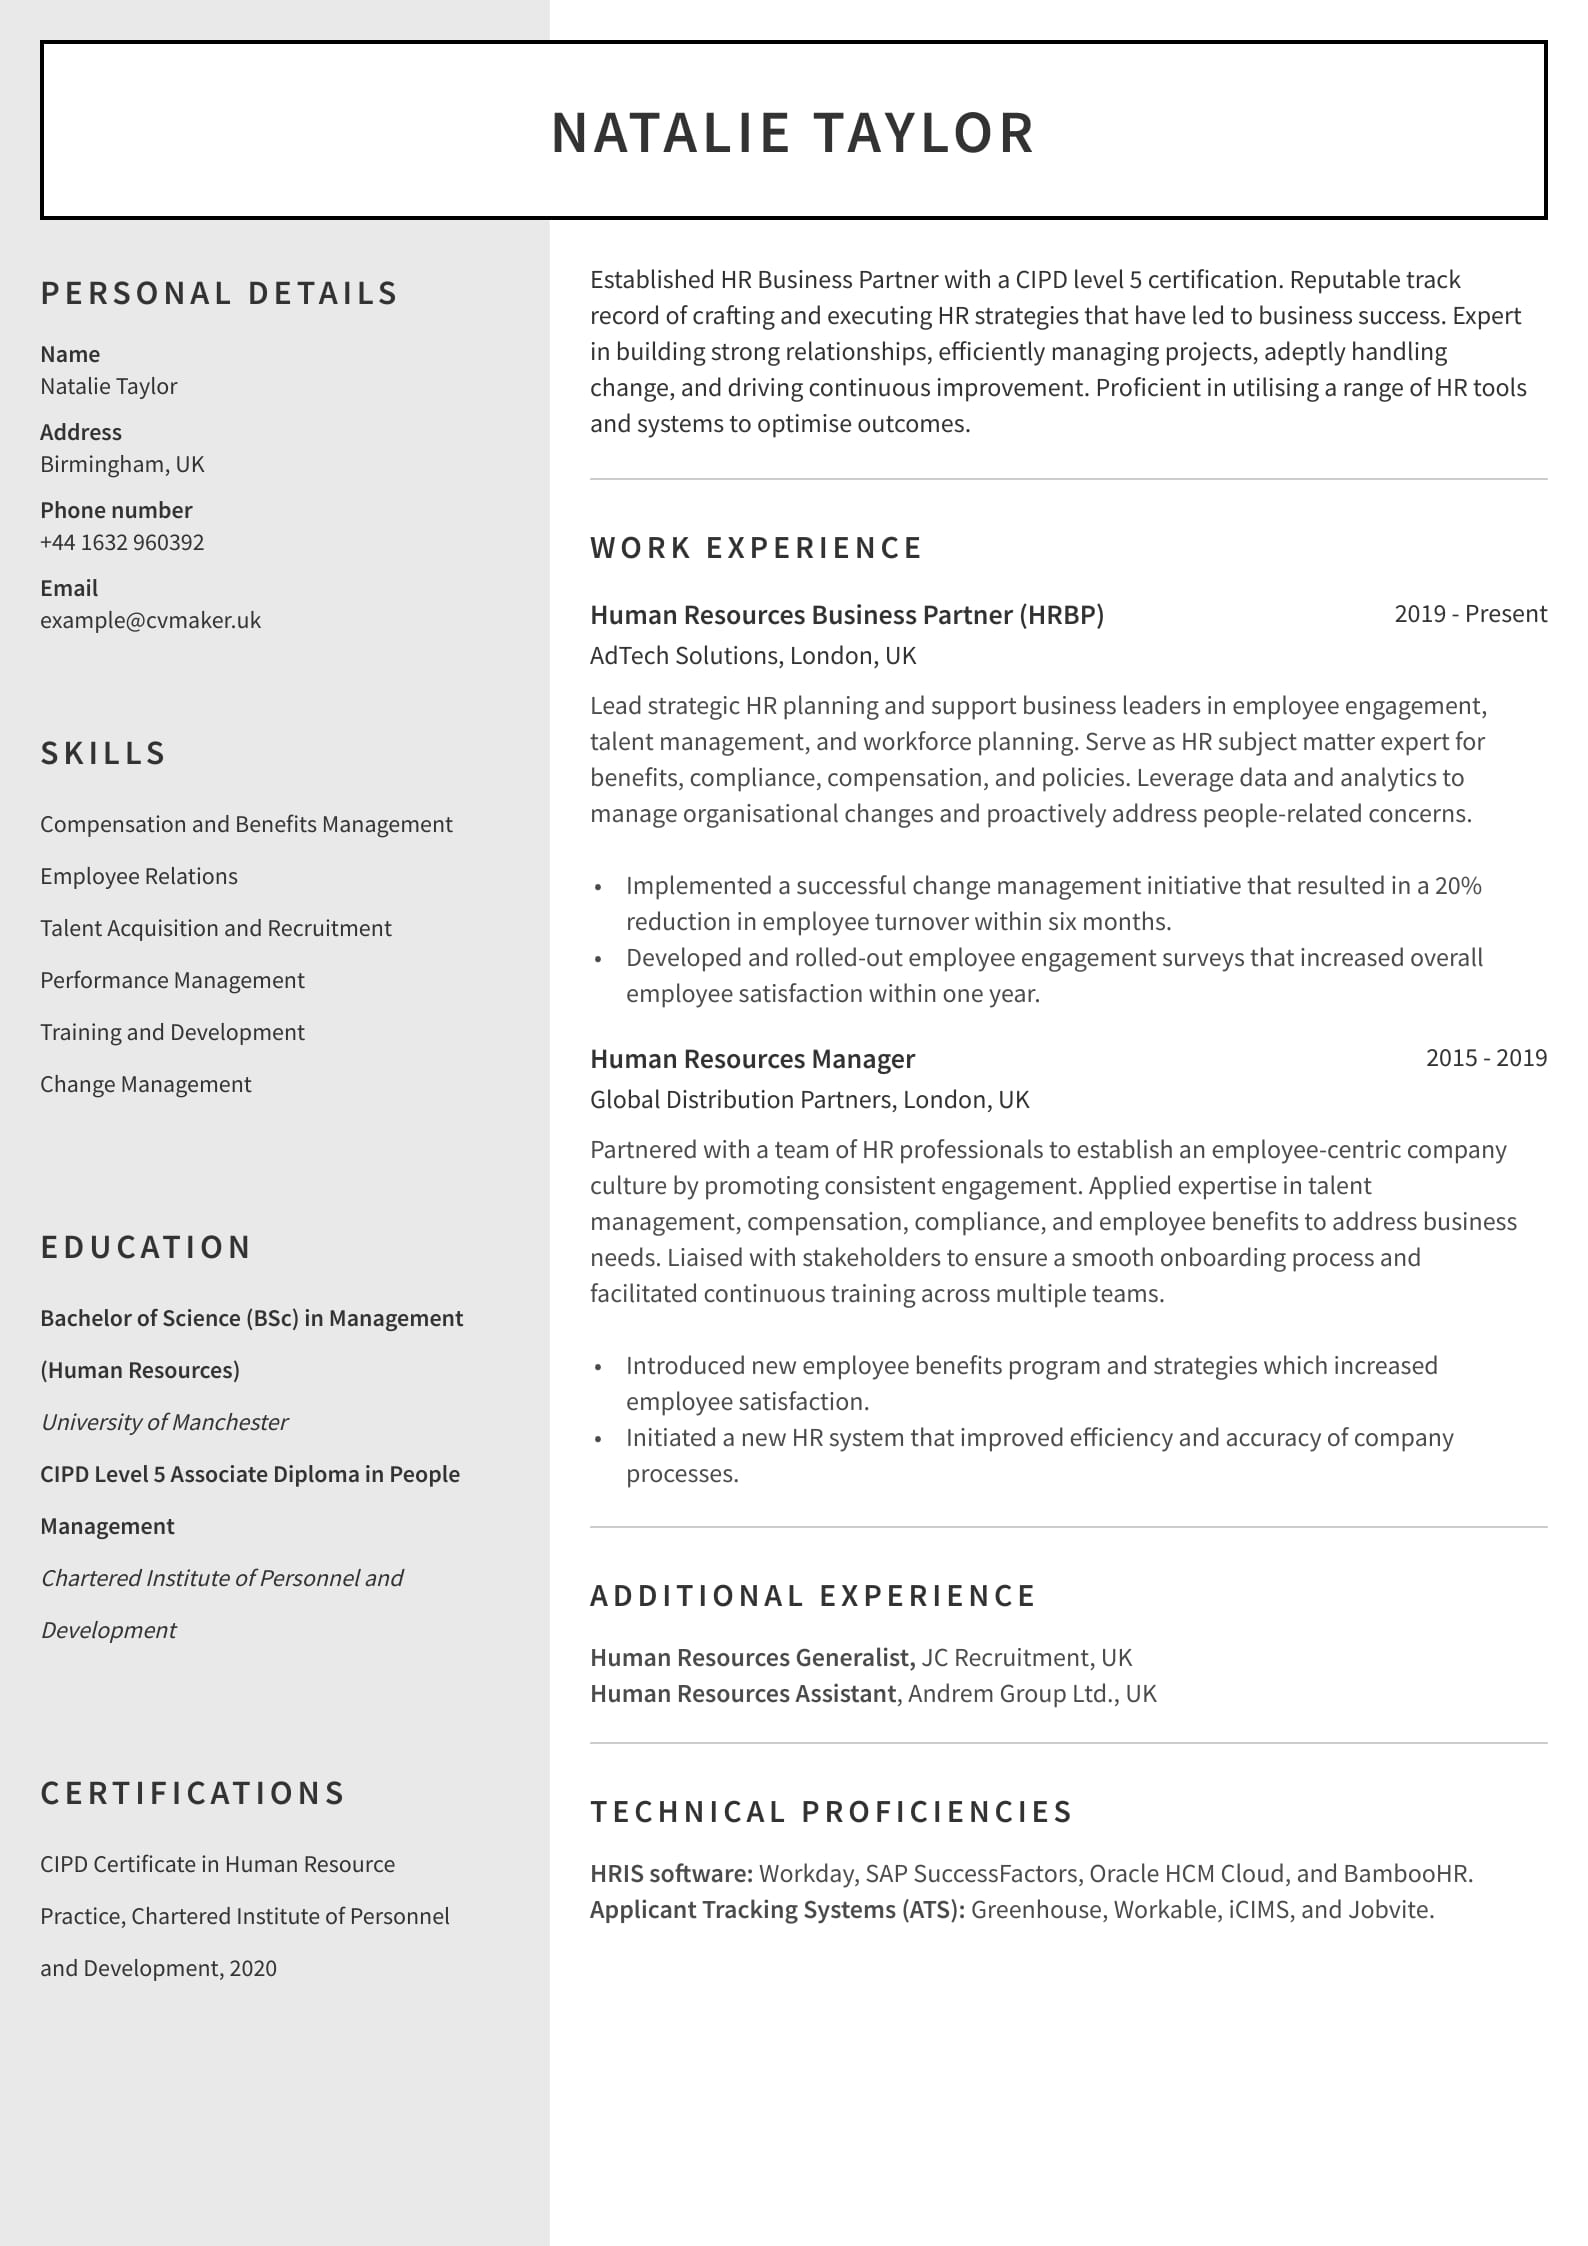 CV example - Human Resources - Auckland template 